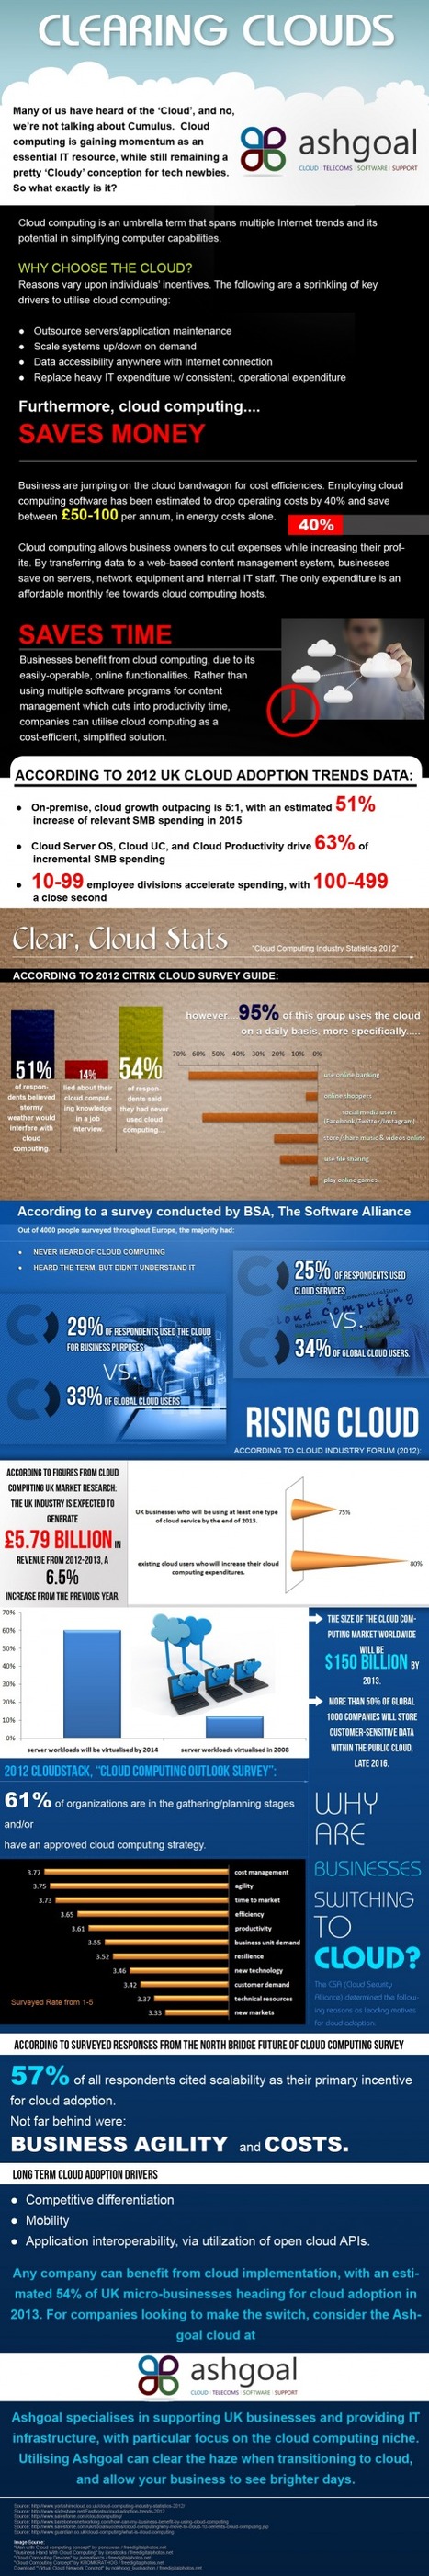 INFOGRAPHIC: Clearing Clouds | AshGoal.com | SBWire Mediawire | Didactics and Technology in Education | Scoop.it